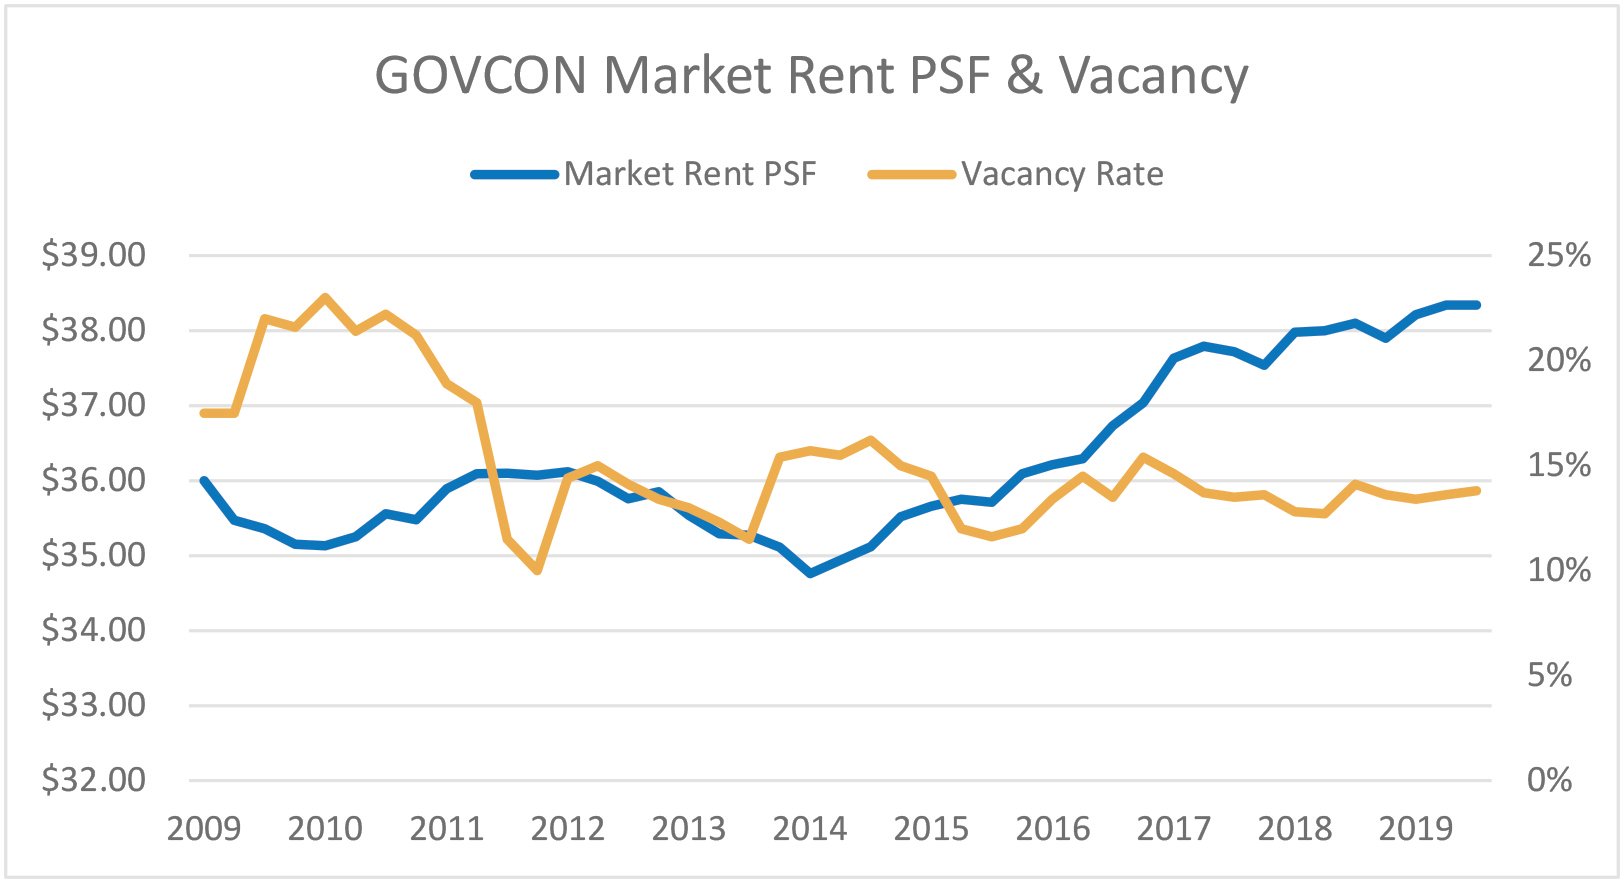 This graph represents the historical vacancy and market rent performance of our 50-building survey.